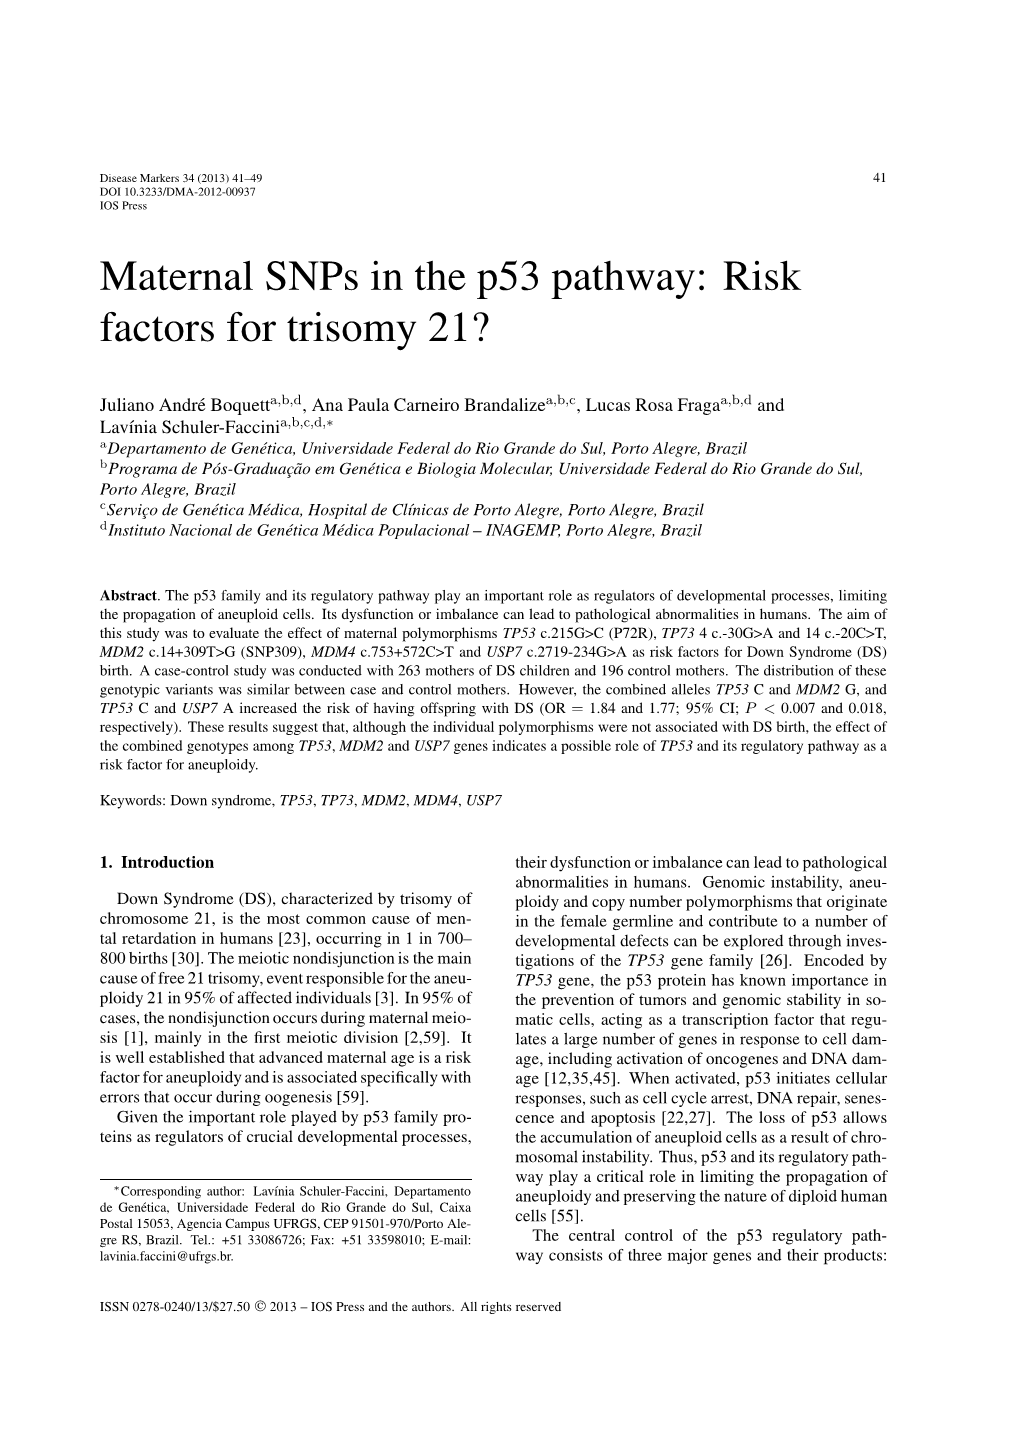 Maternal Snps in the P53 Pathway: Risk Factors for Trisomy 21?